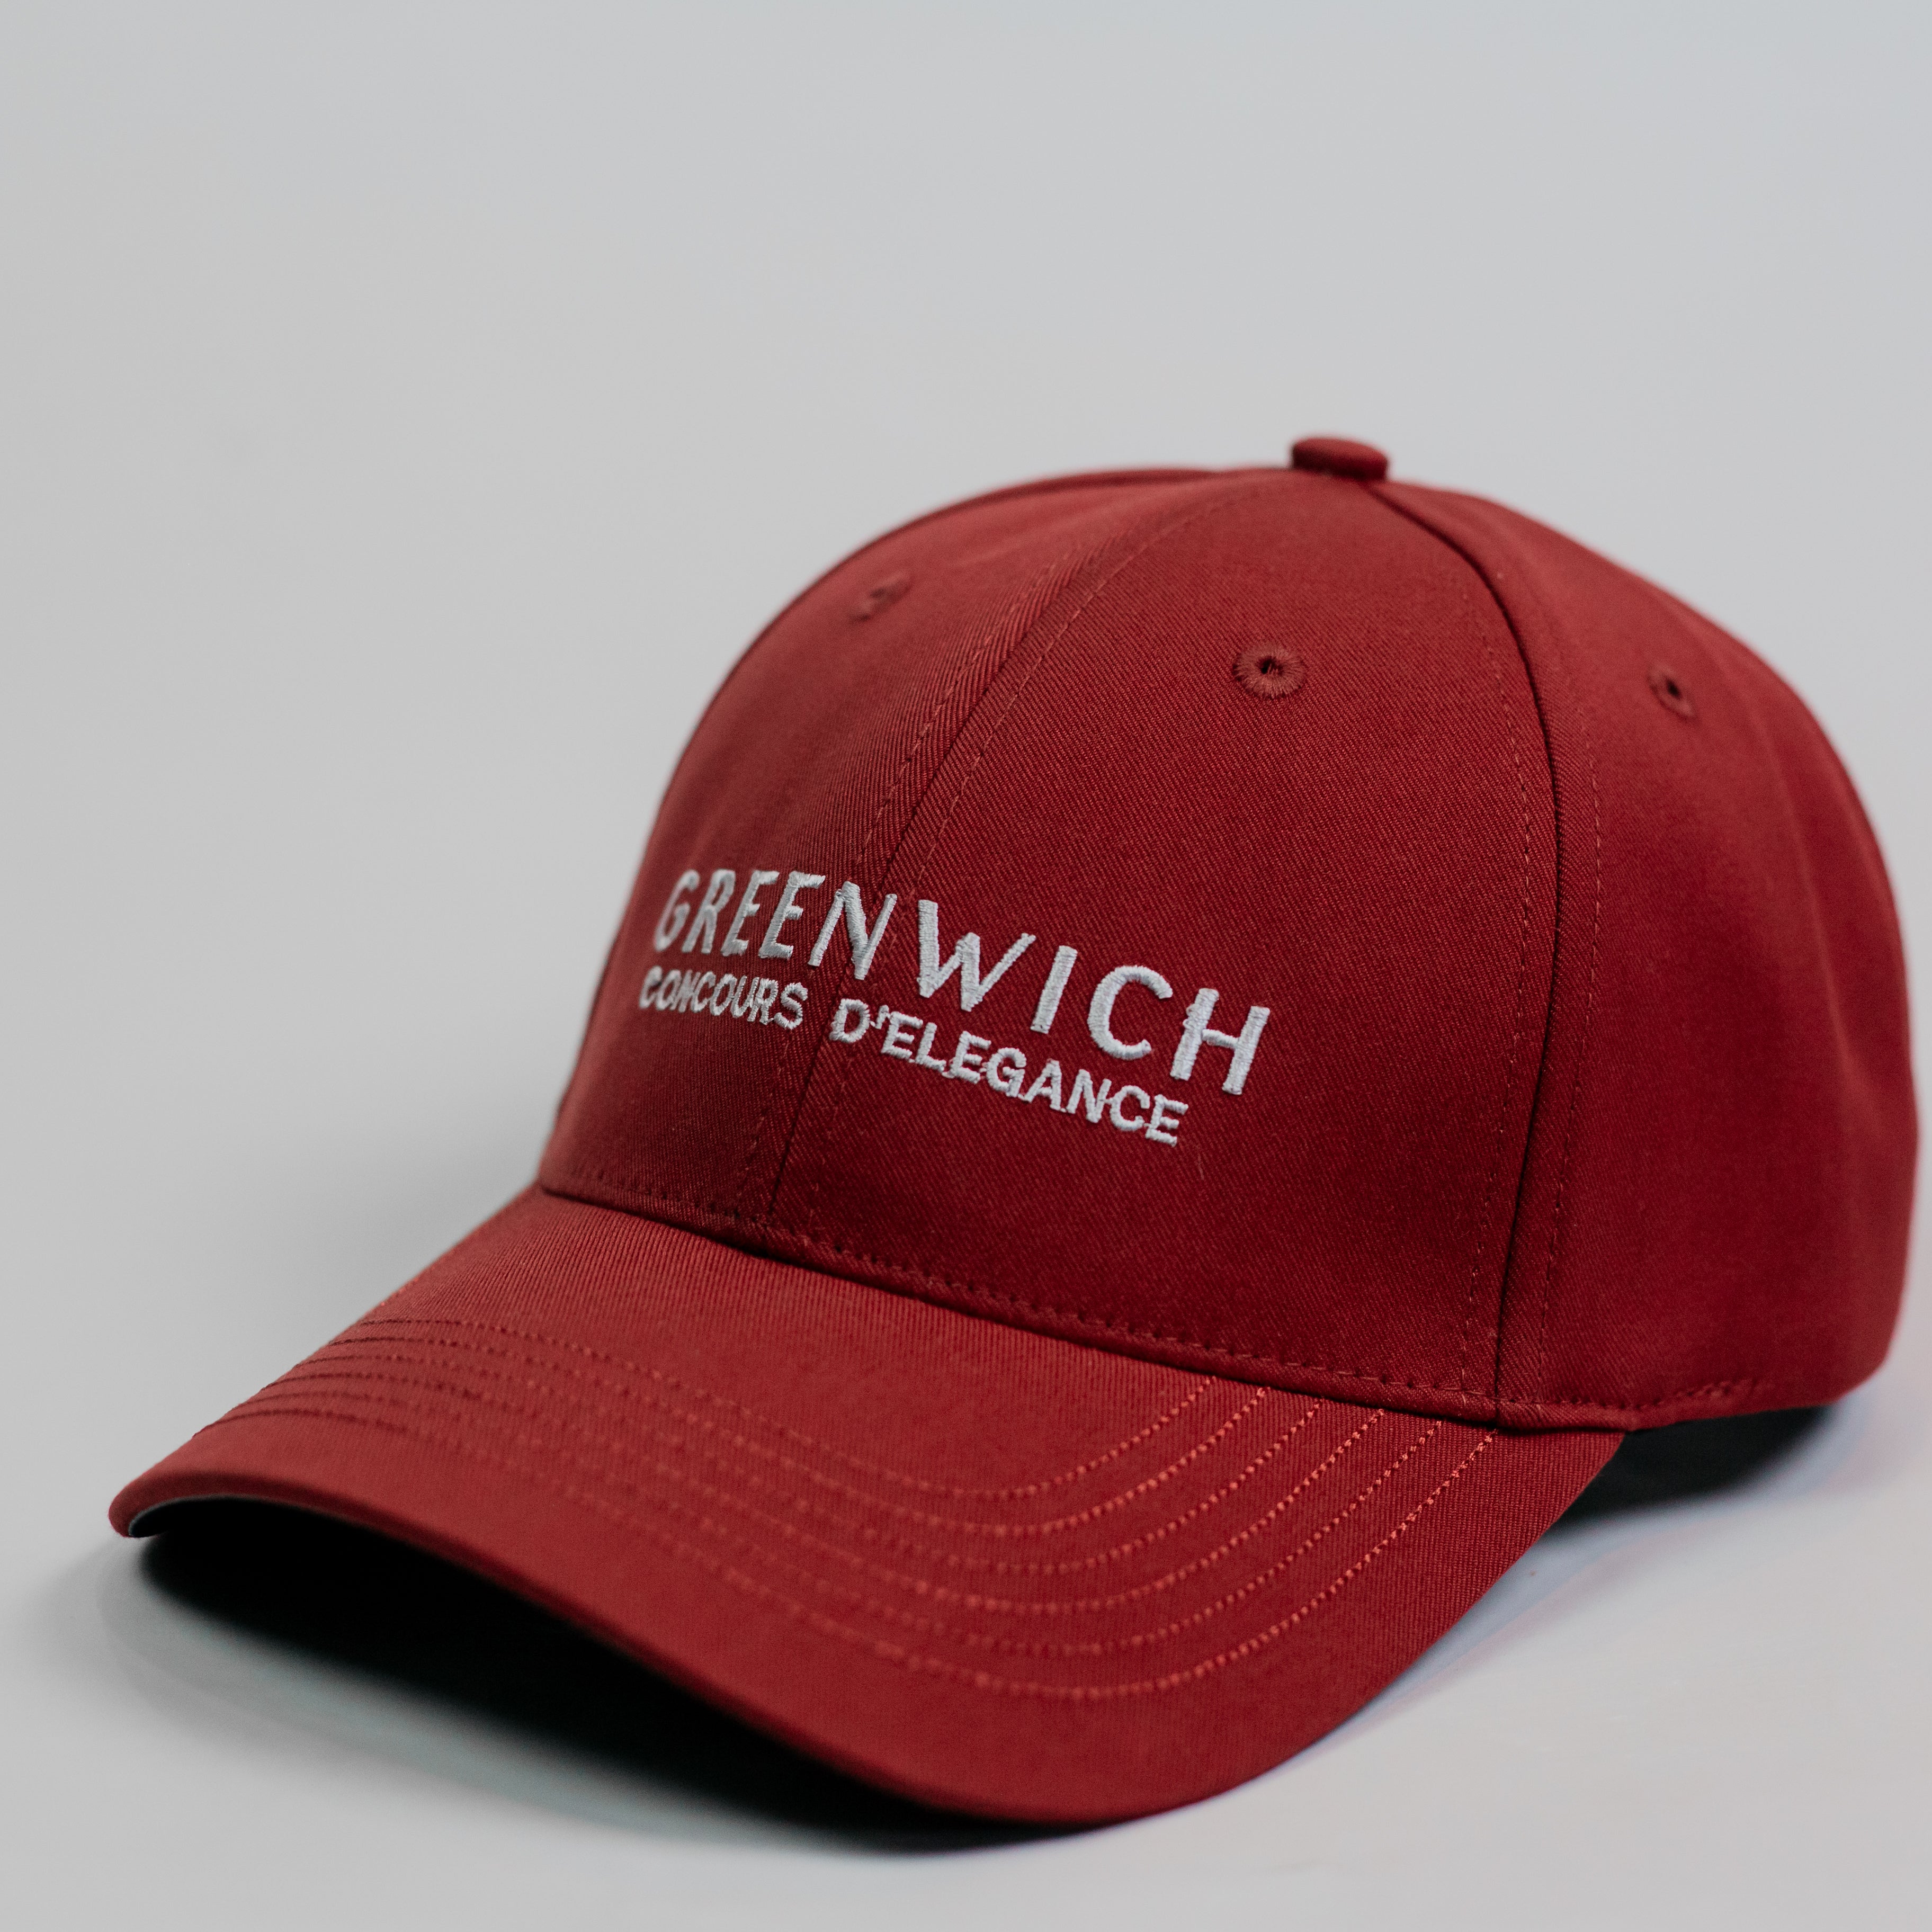 2022 Greenwich Concours Baseball Hat